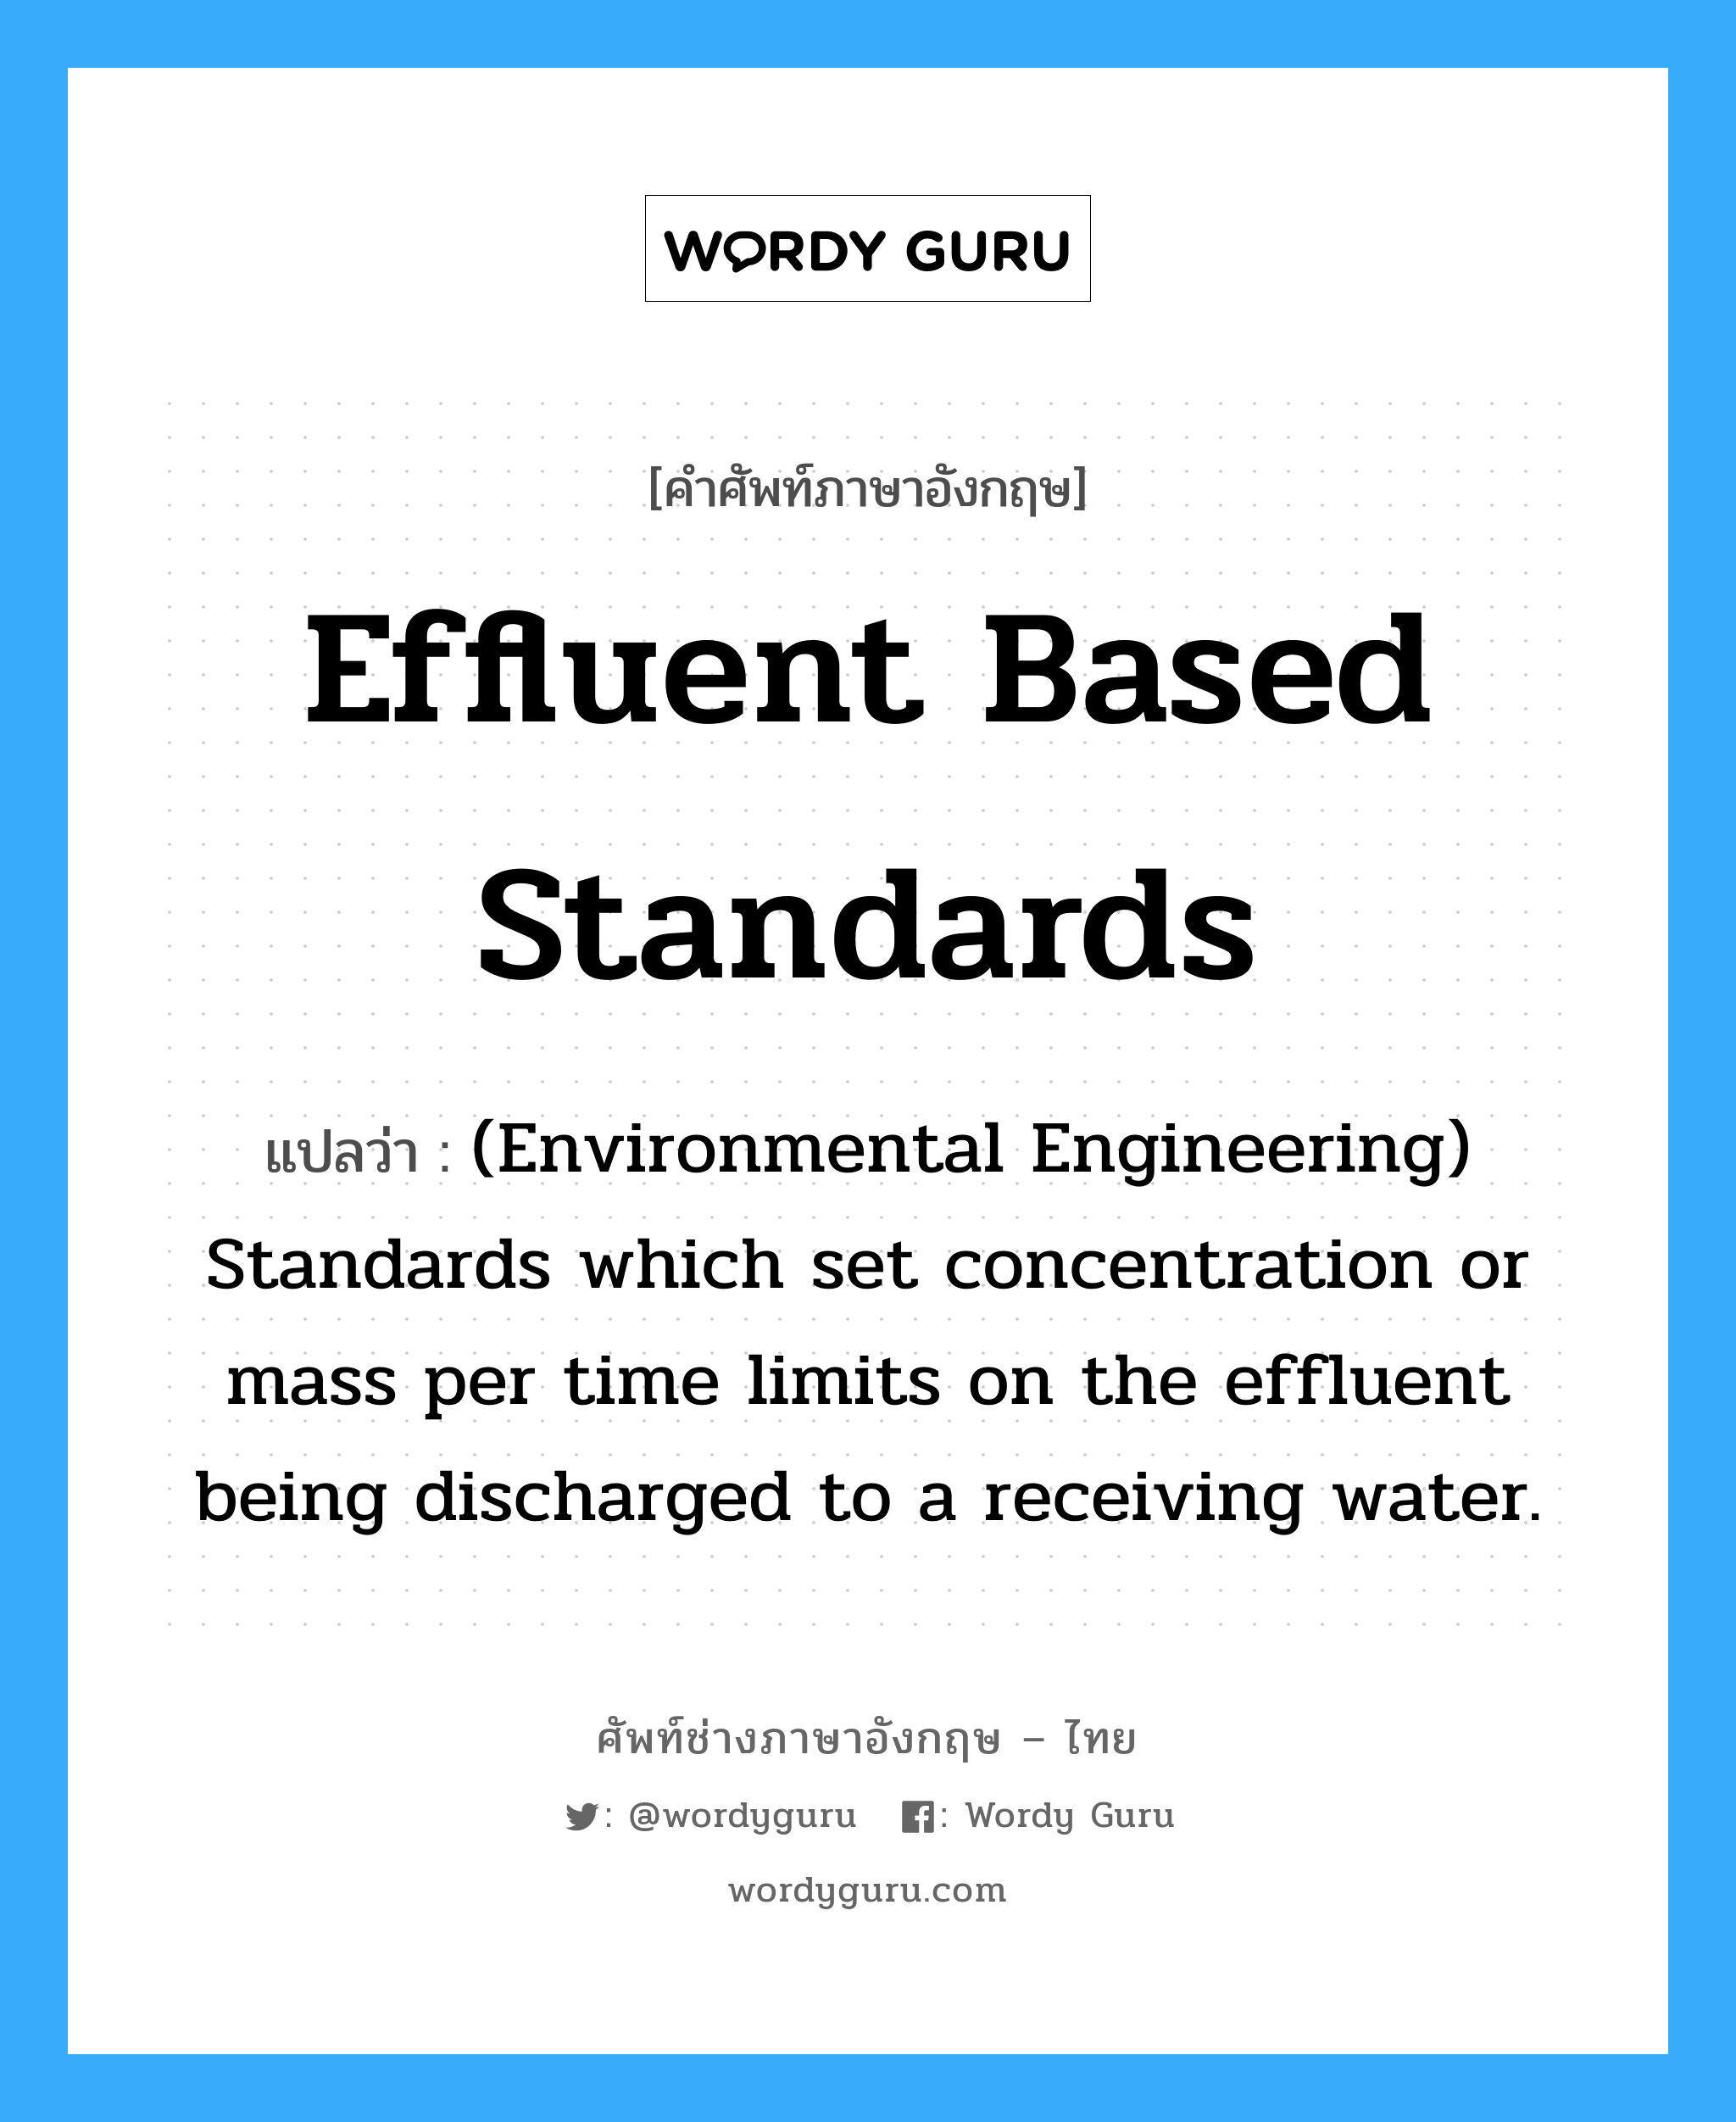 (Environmental Engineering) Standards which set concentration or mass per time limits on the effluent being discharged to a receiving water. ภาษาอังกฤษ?, คำศัพท์ช่างภาษาอังกฤษ - ไทย (Environmental Engineering) Standards which set concentration or mass per time limits on the effluent being discharged to a receiving water. คำศัพท์ภาษาอังกฤษ (Environmental Engineering) Standards which set concentration or mass per time limits on the effluent being discharged to a receiving water. แปลว่า Effluent based standards